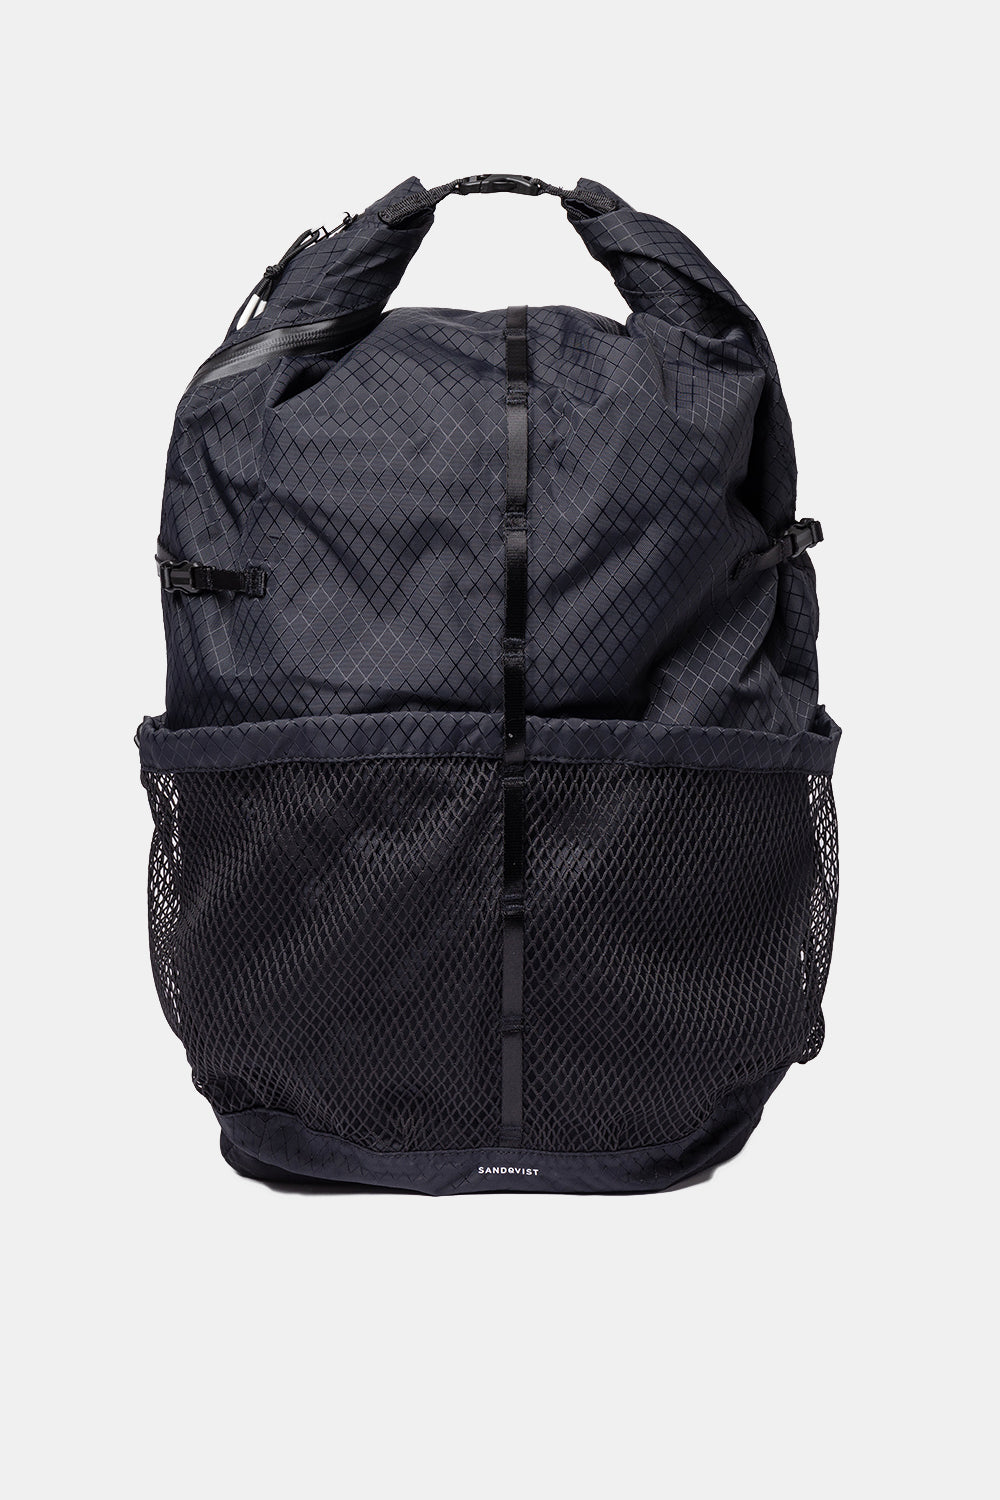 Sandqvist Kevin Rolltop Recycled Nylon Backpack (Black)